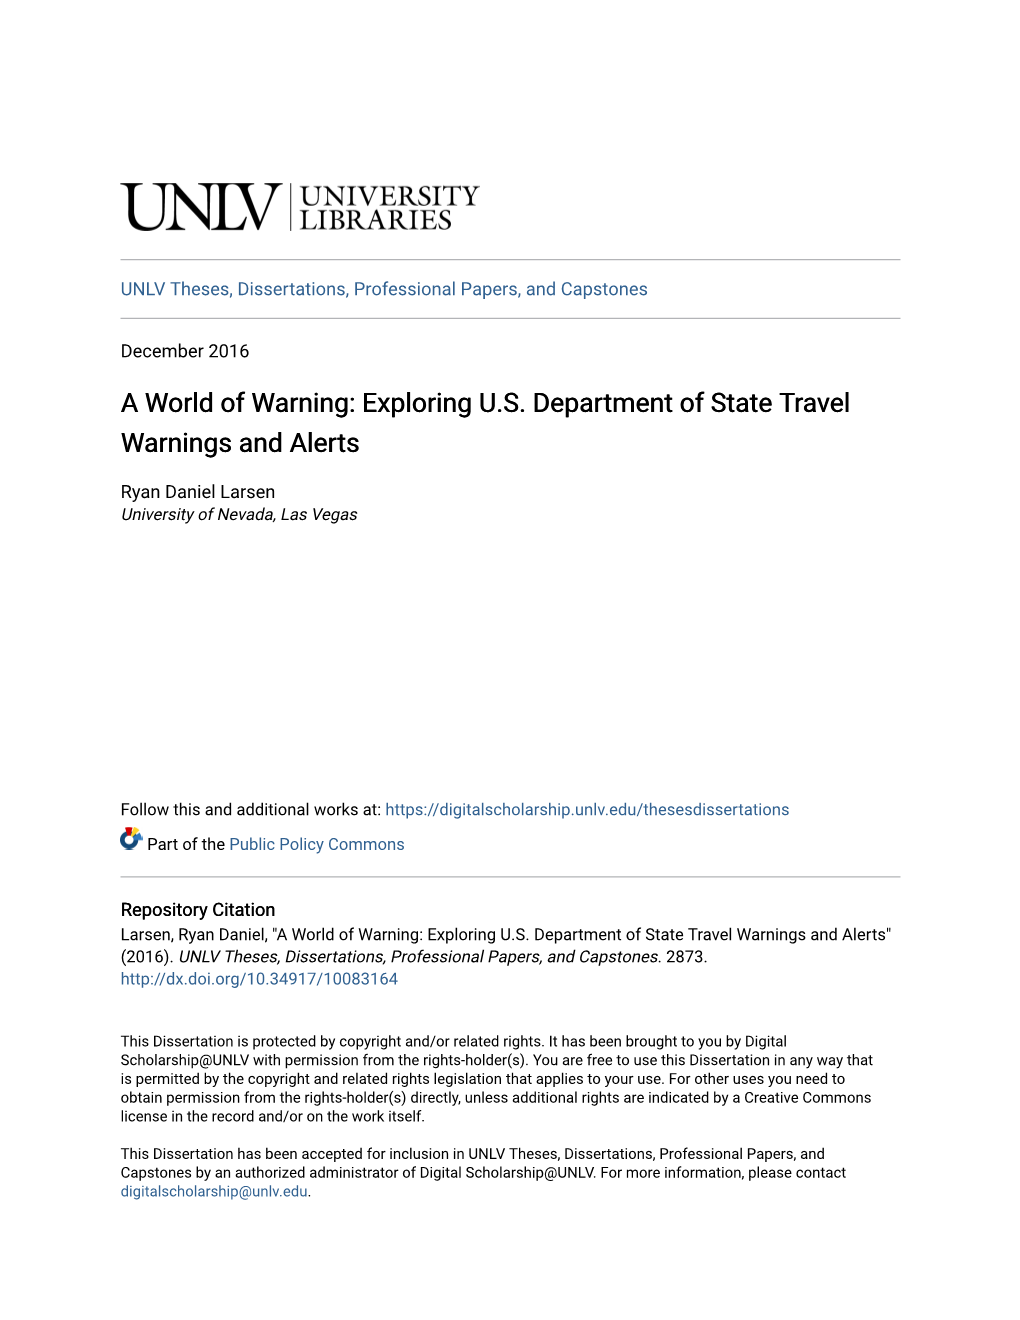 Exploring US Department of State Travel Warnings and Alerts